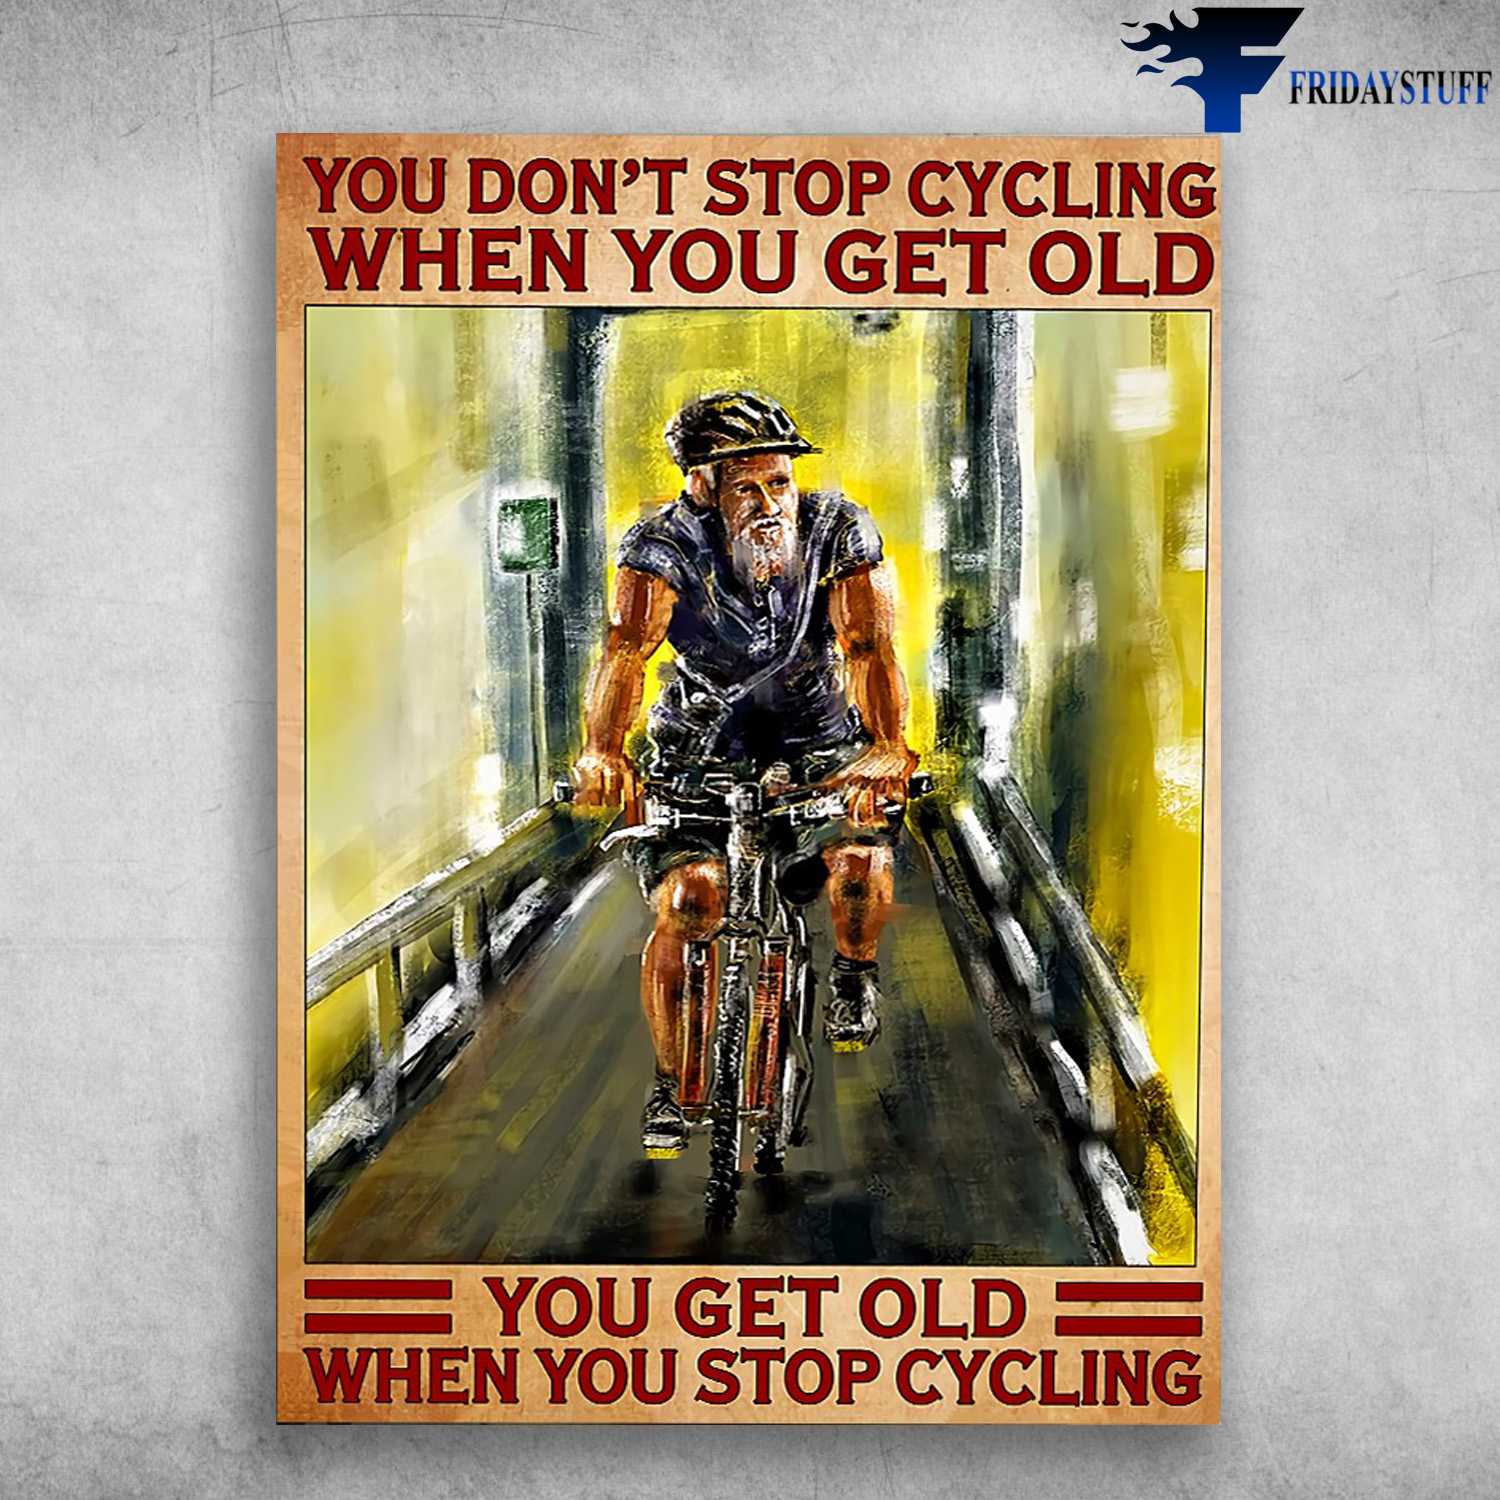 Old Man Cycling, Bicycle Poster - You Don't Stop Cycling When You Get Old, You Get Old When You Stop Cycling, Biker Lover